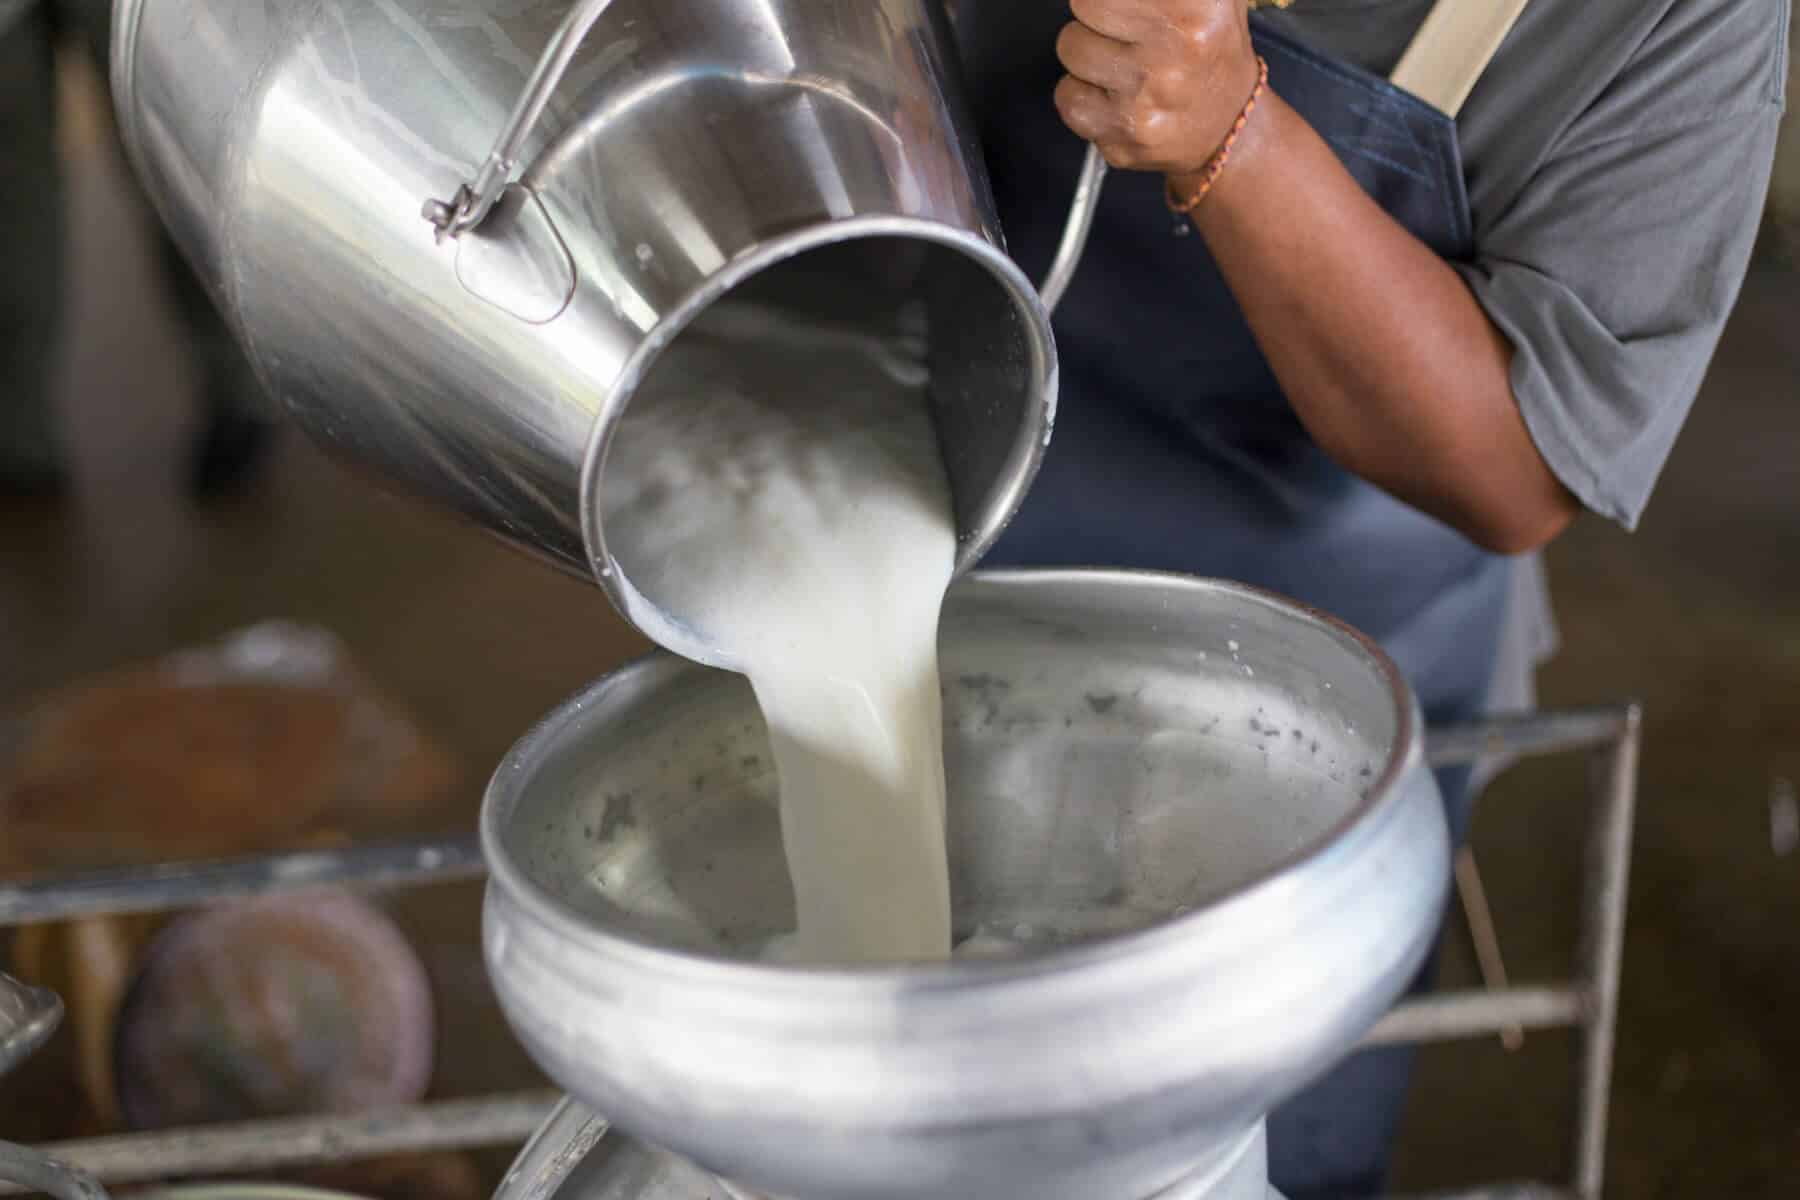 A worker pourring some milk in a machine